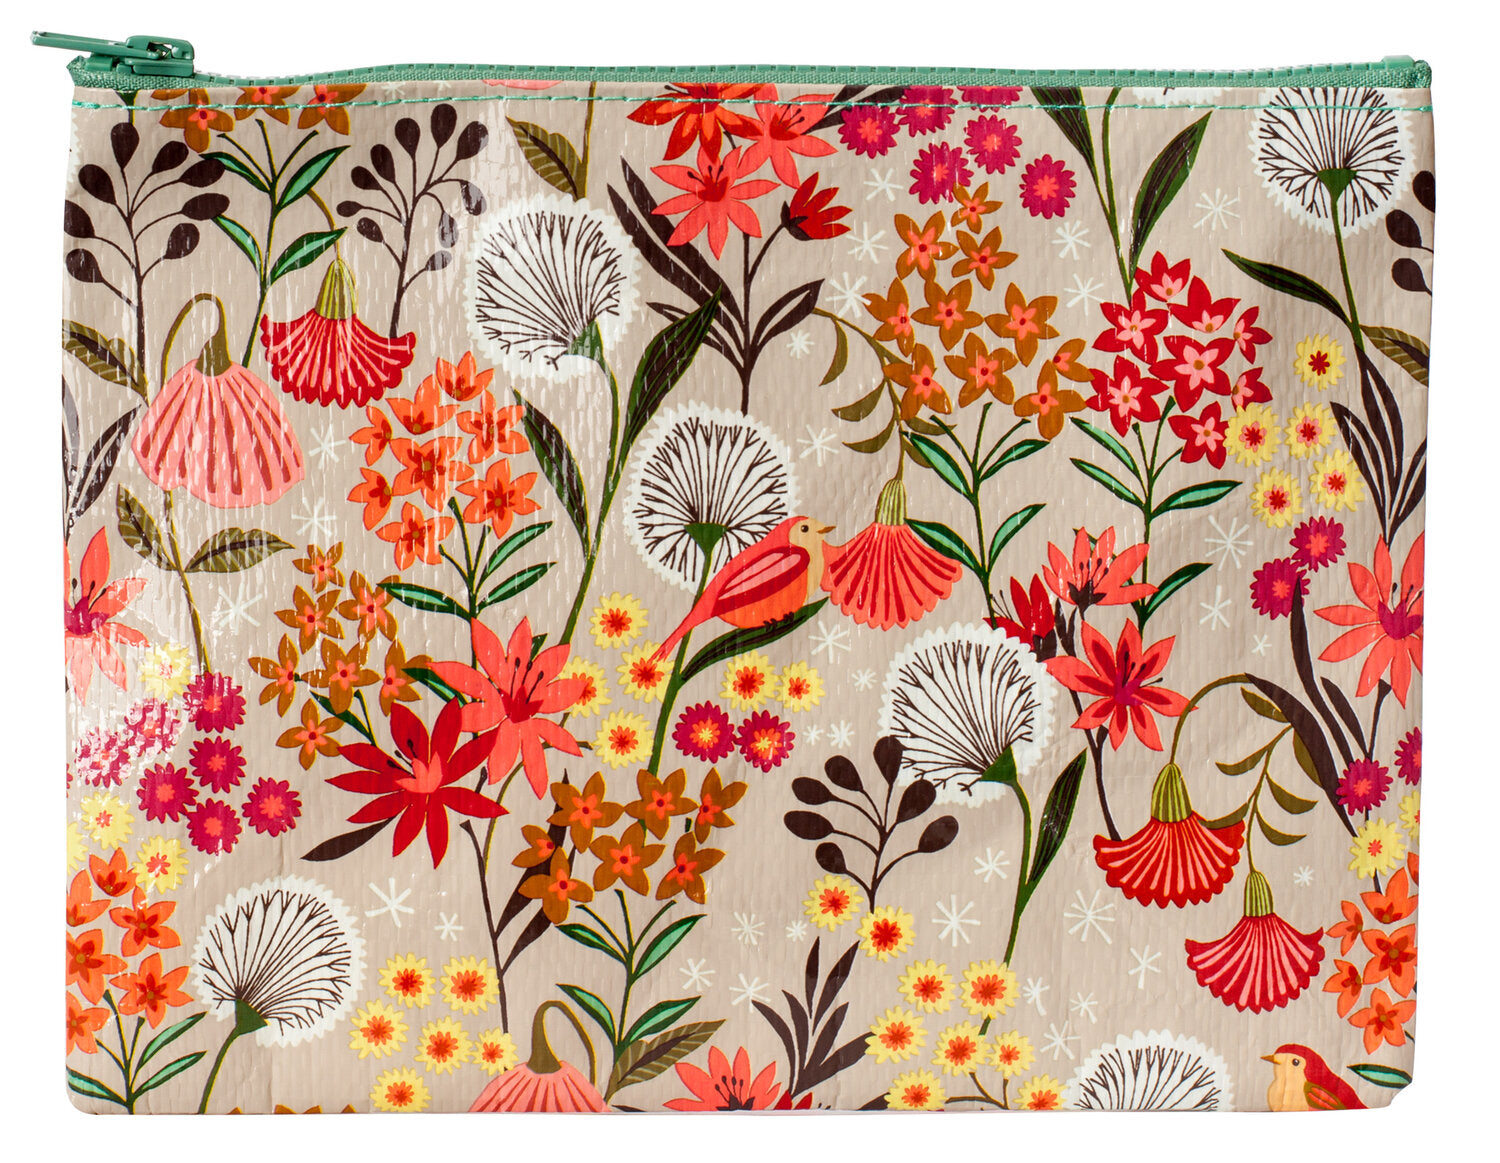 A beige Blue Q Zipper pouch with pink, red, orange and green flowers all over and white daffodils.